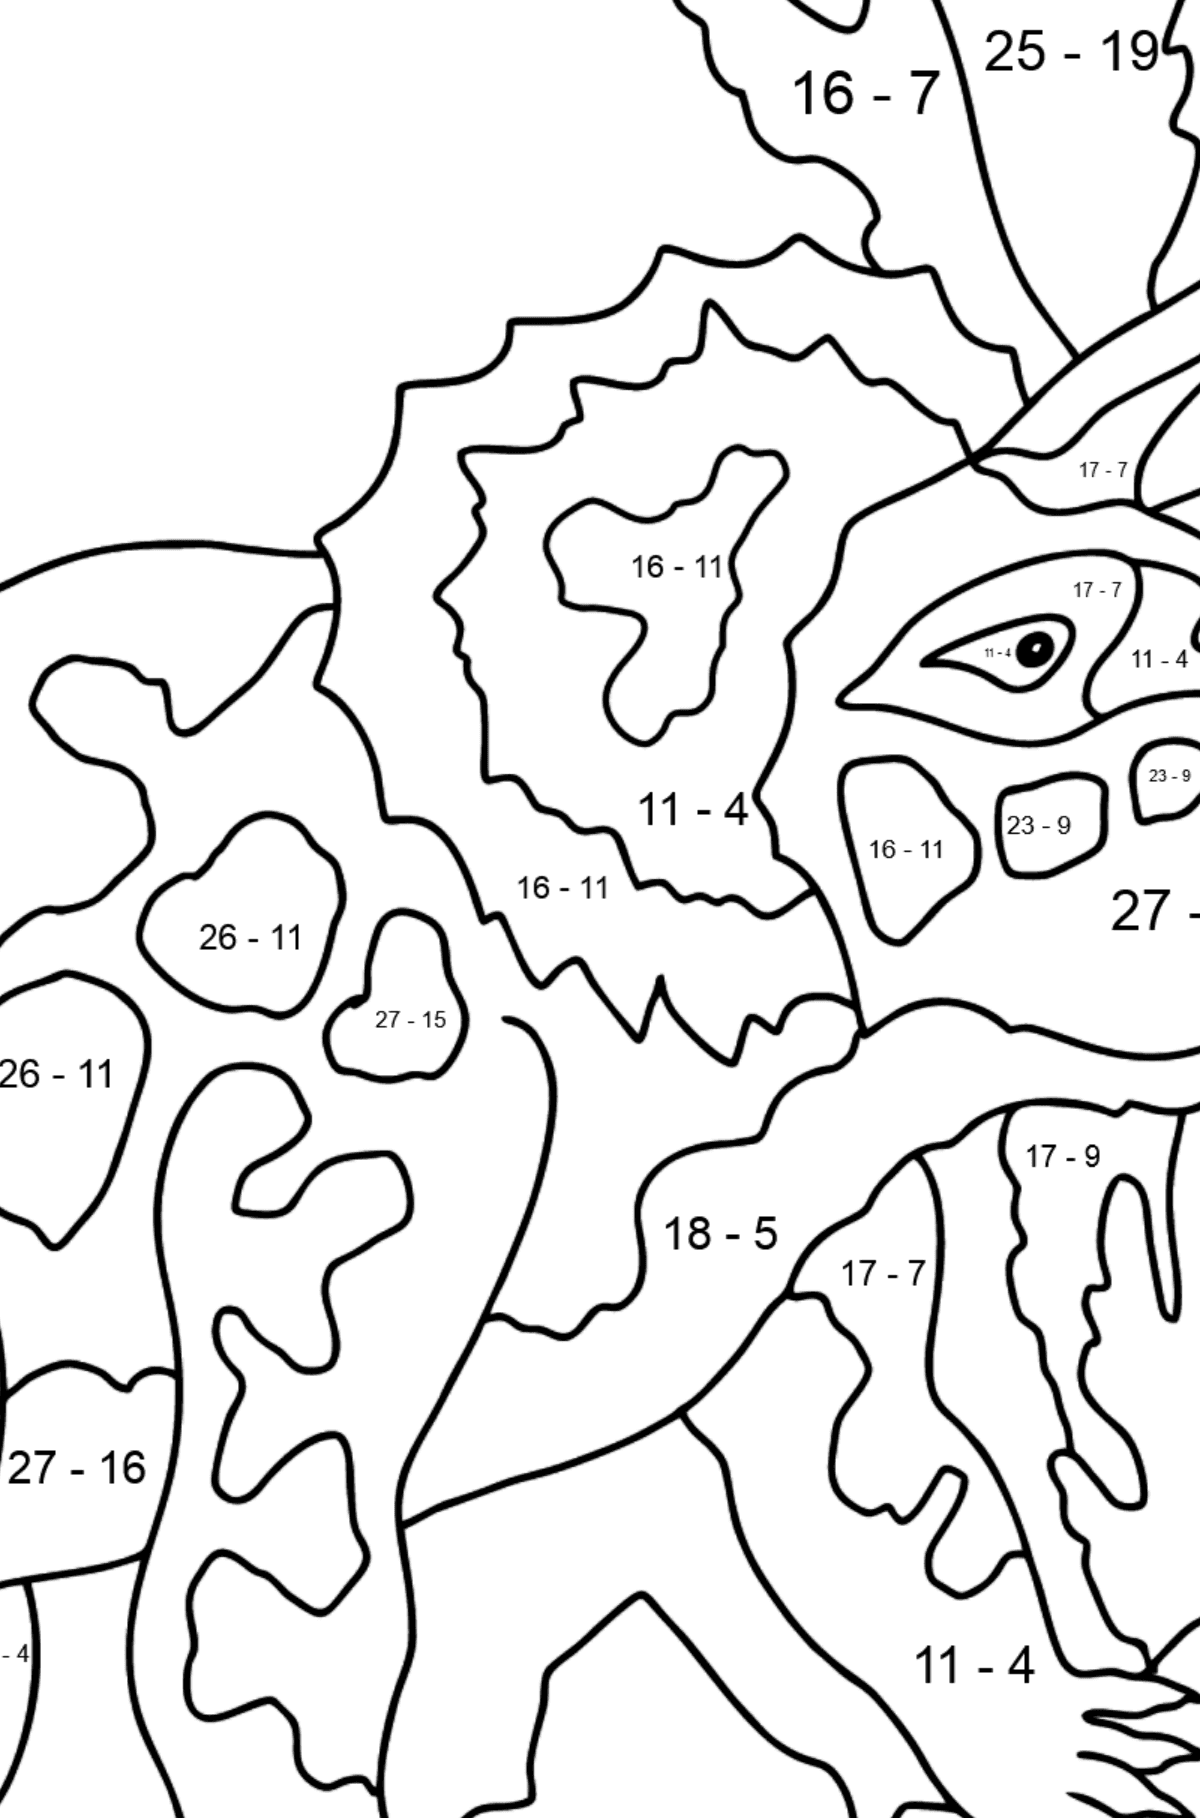 Coloring Page - Triceratops - A Grass-Eating Dinosaur - Math Coloring - Subtraction for Kids